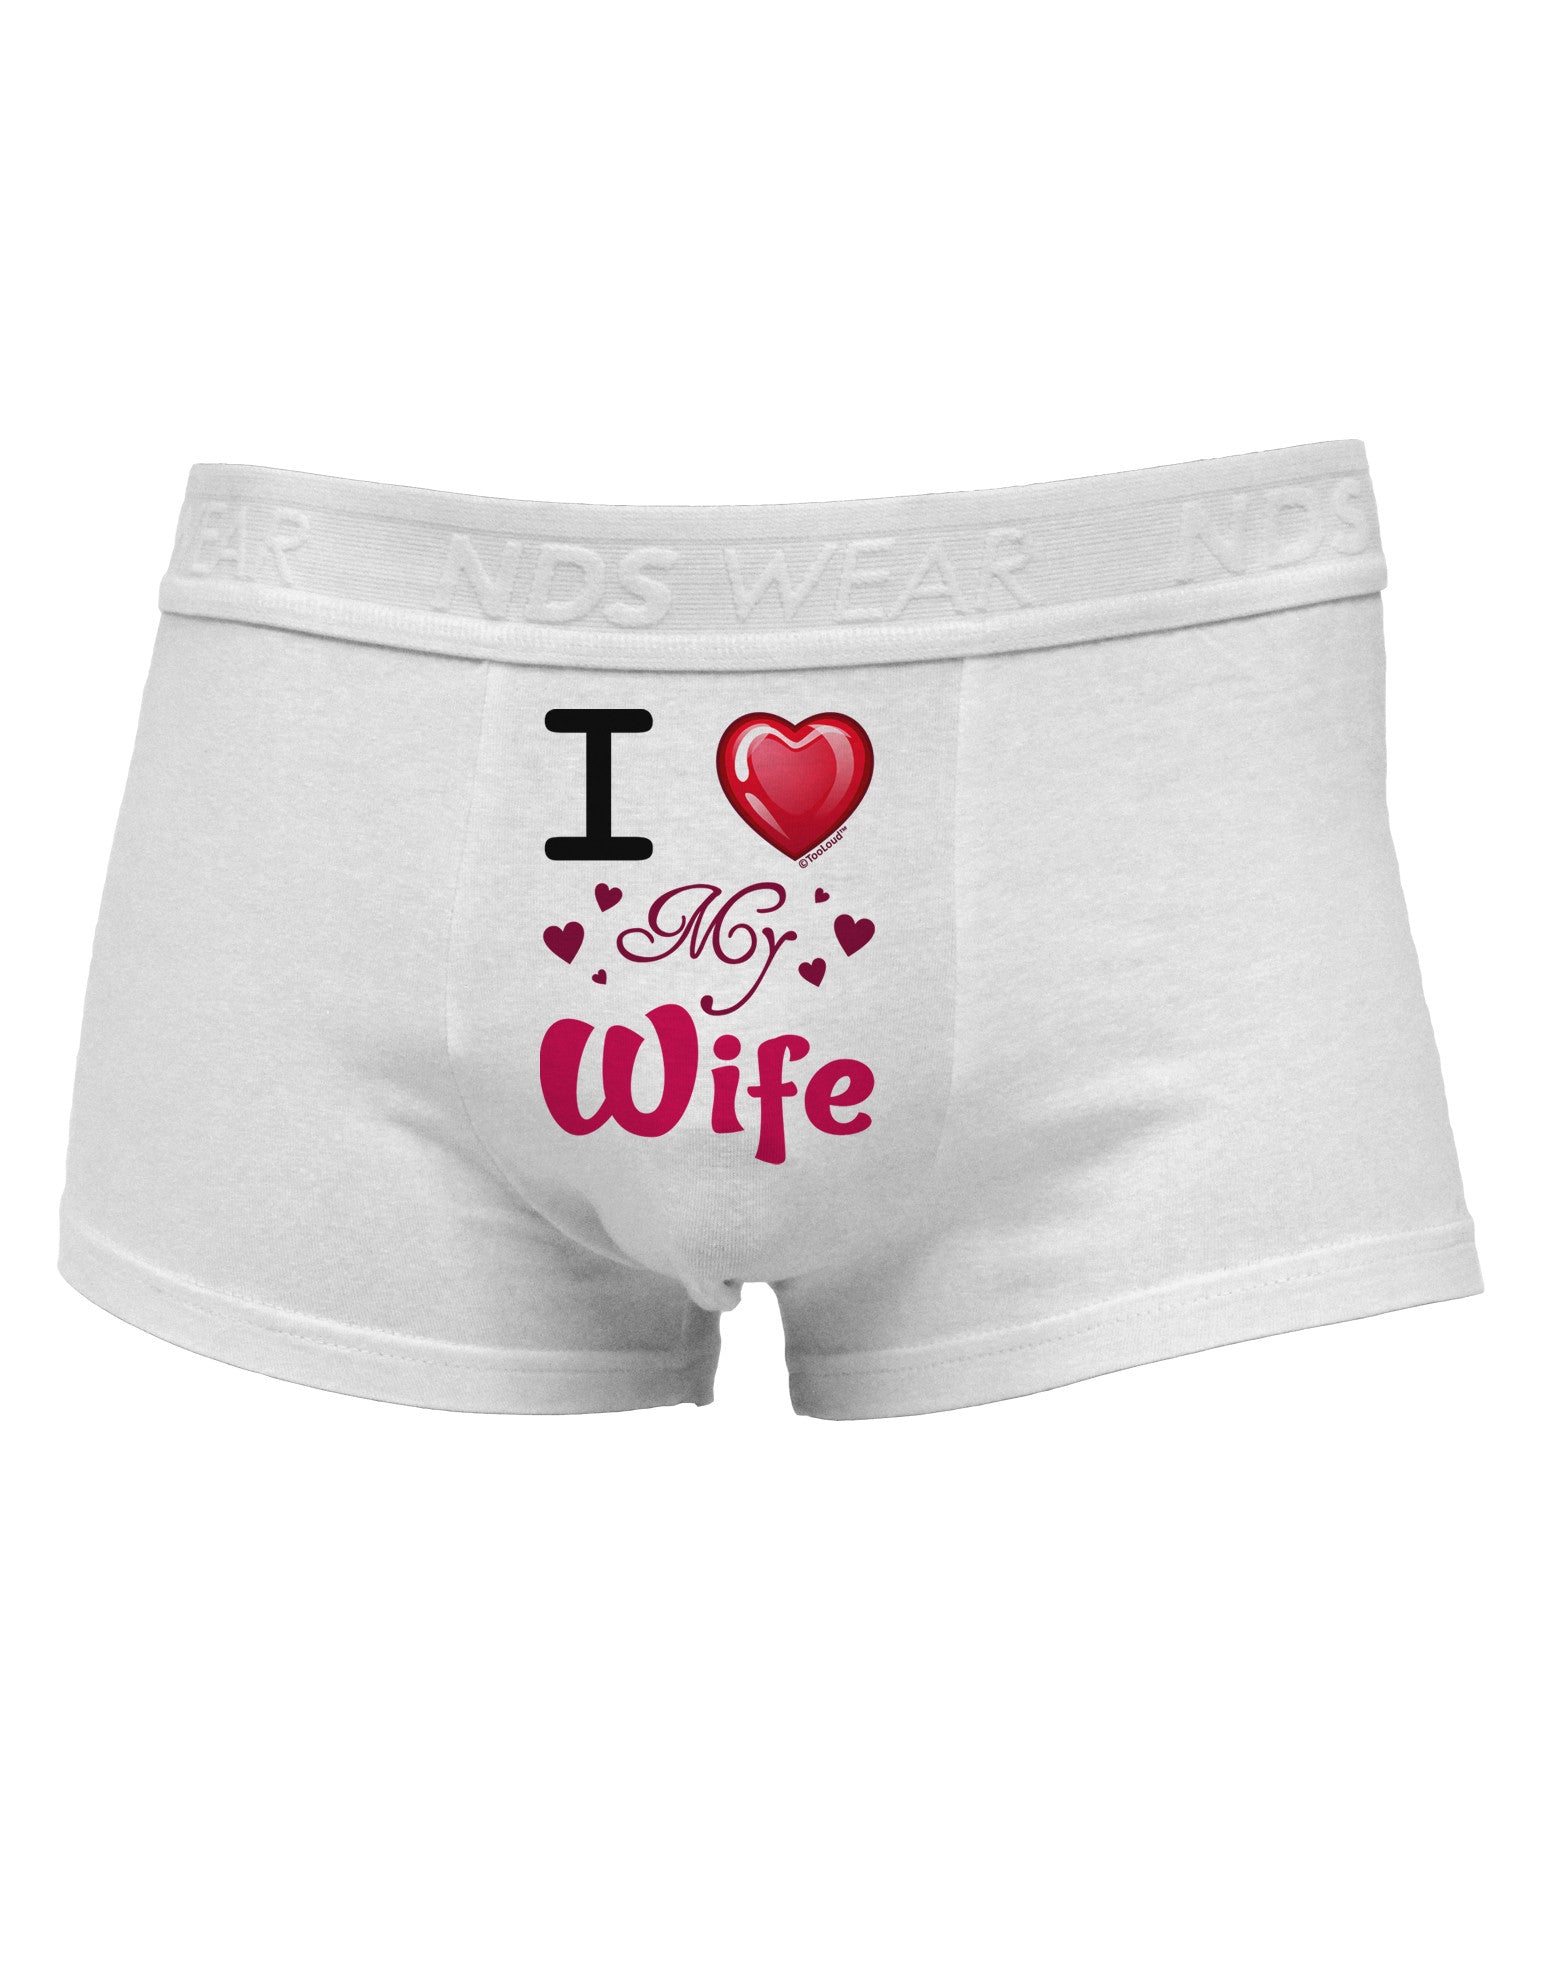 Say What You Mean TextMens Cotton Trunk Underwear by TooLoud